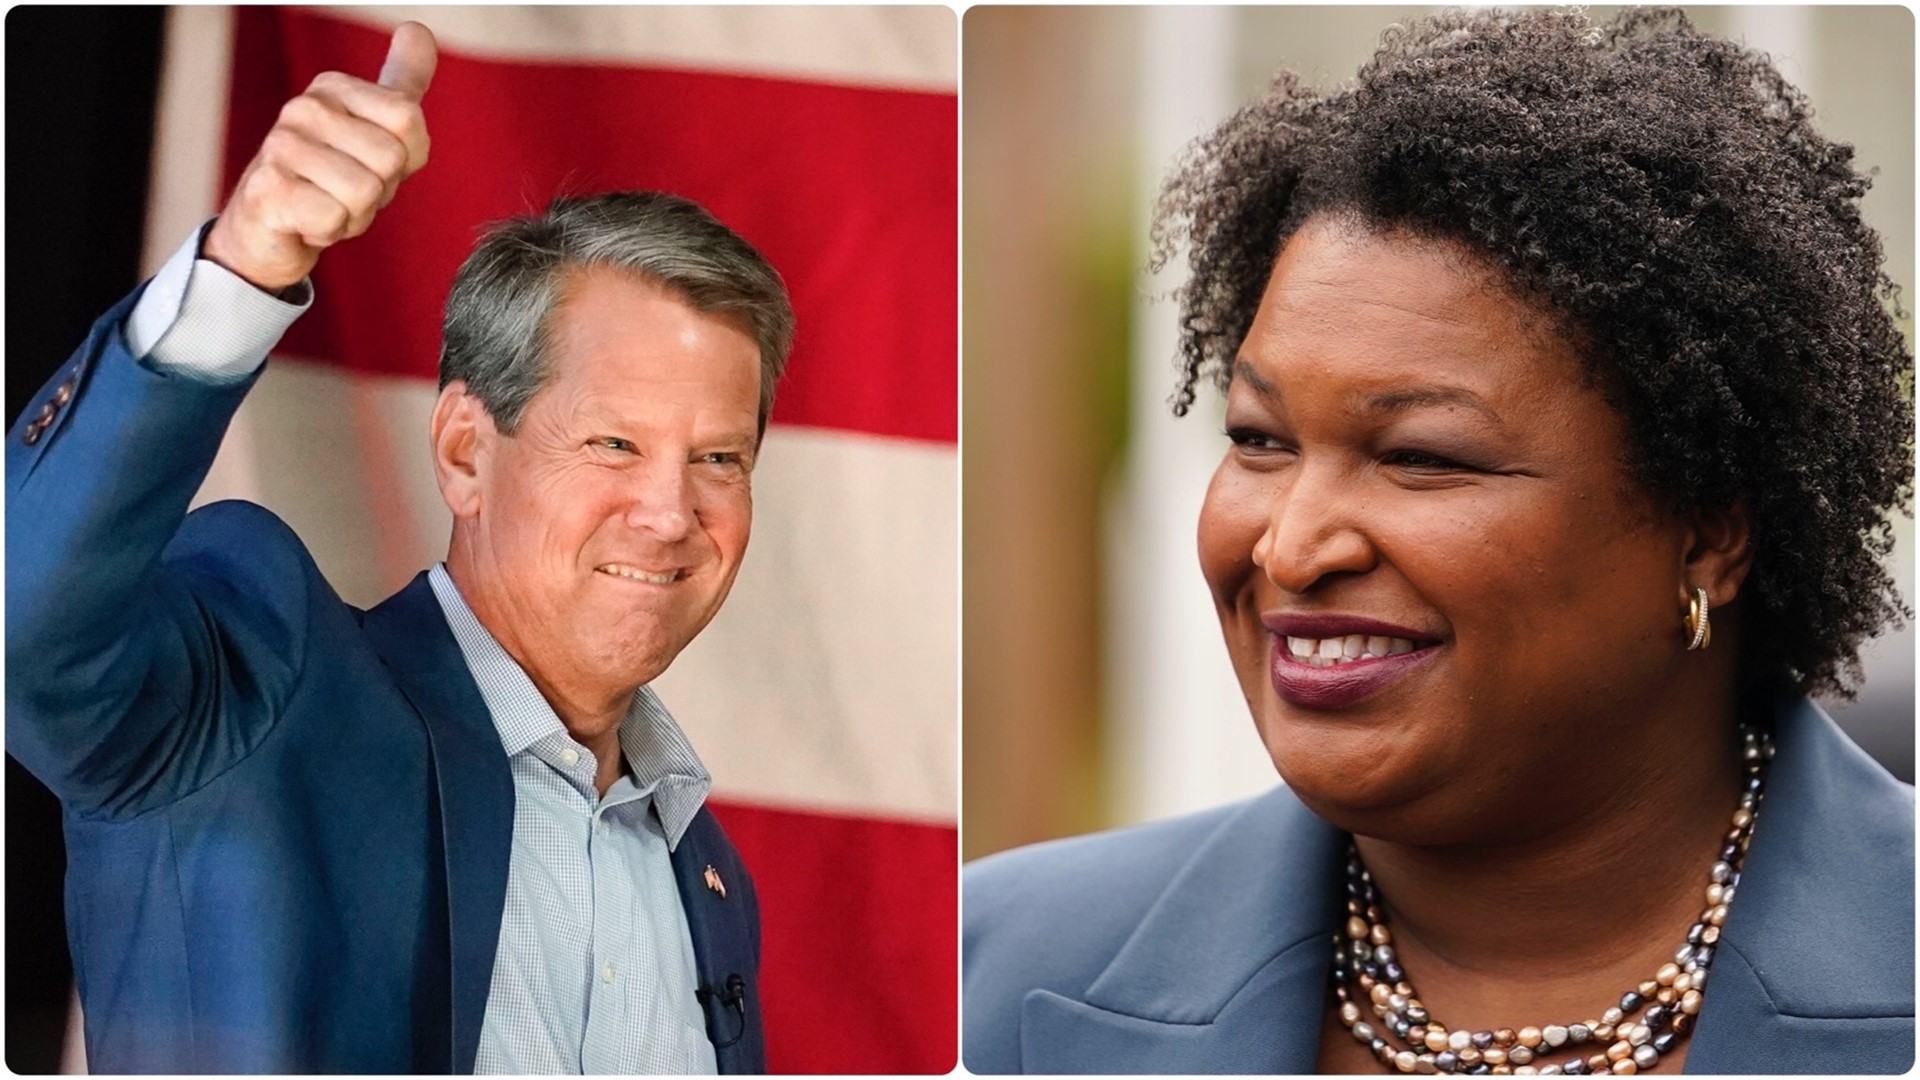 We now know the results of the Georgia governors race.